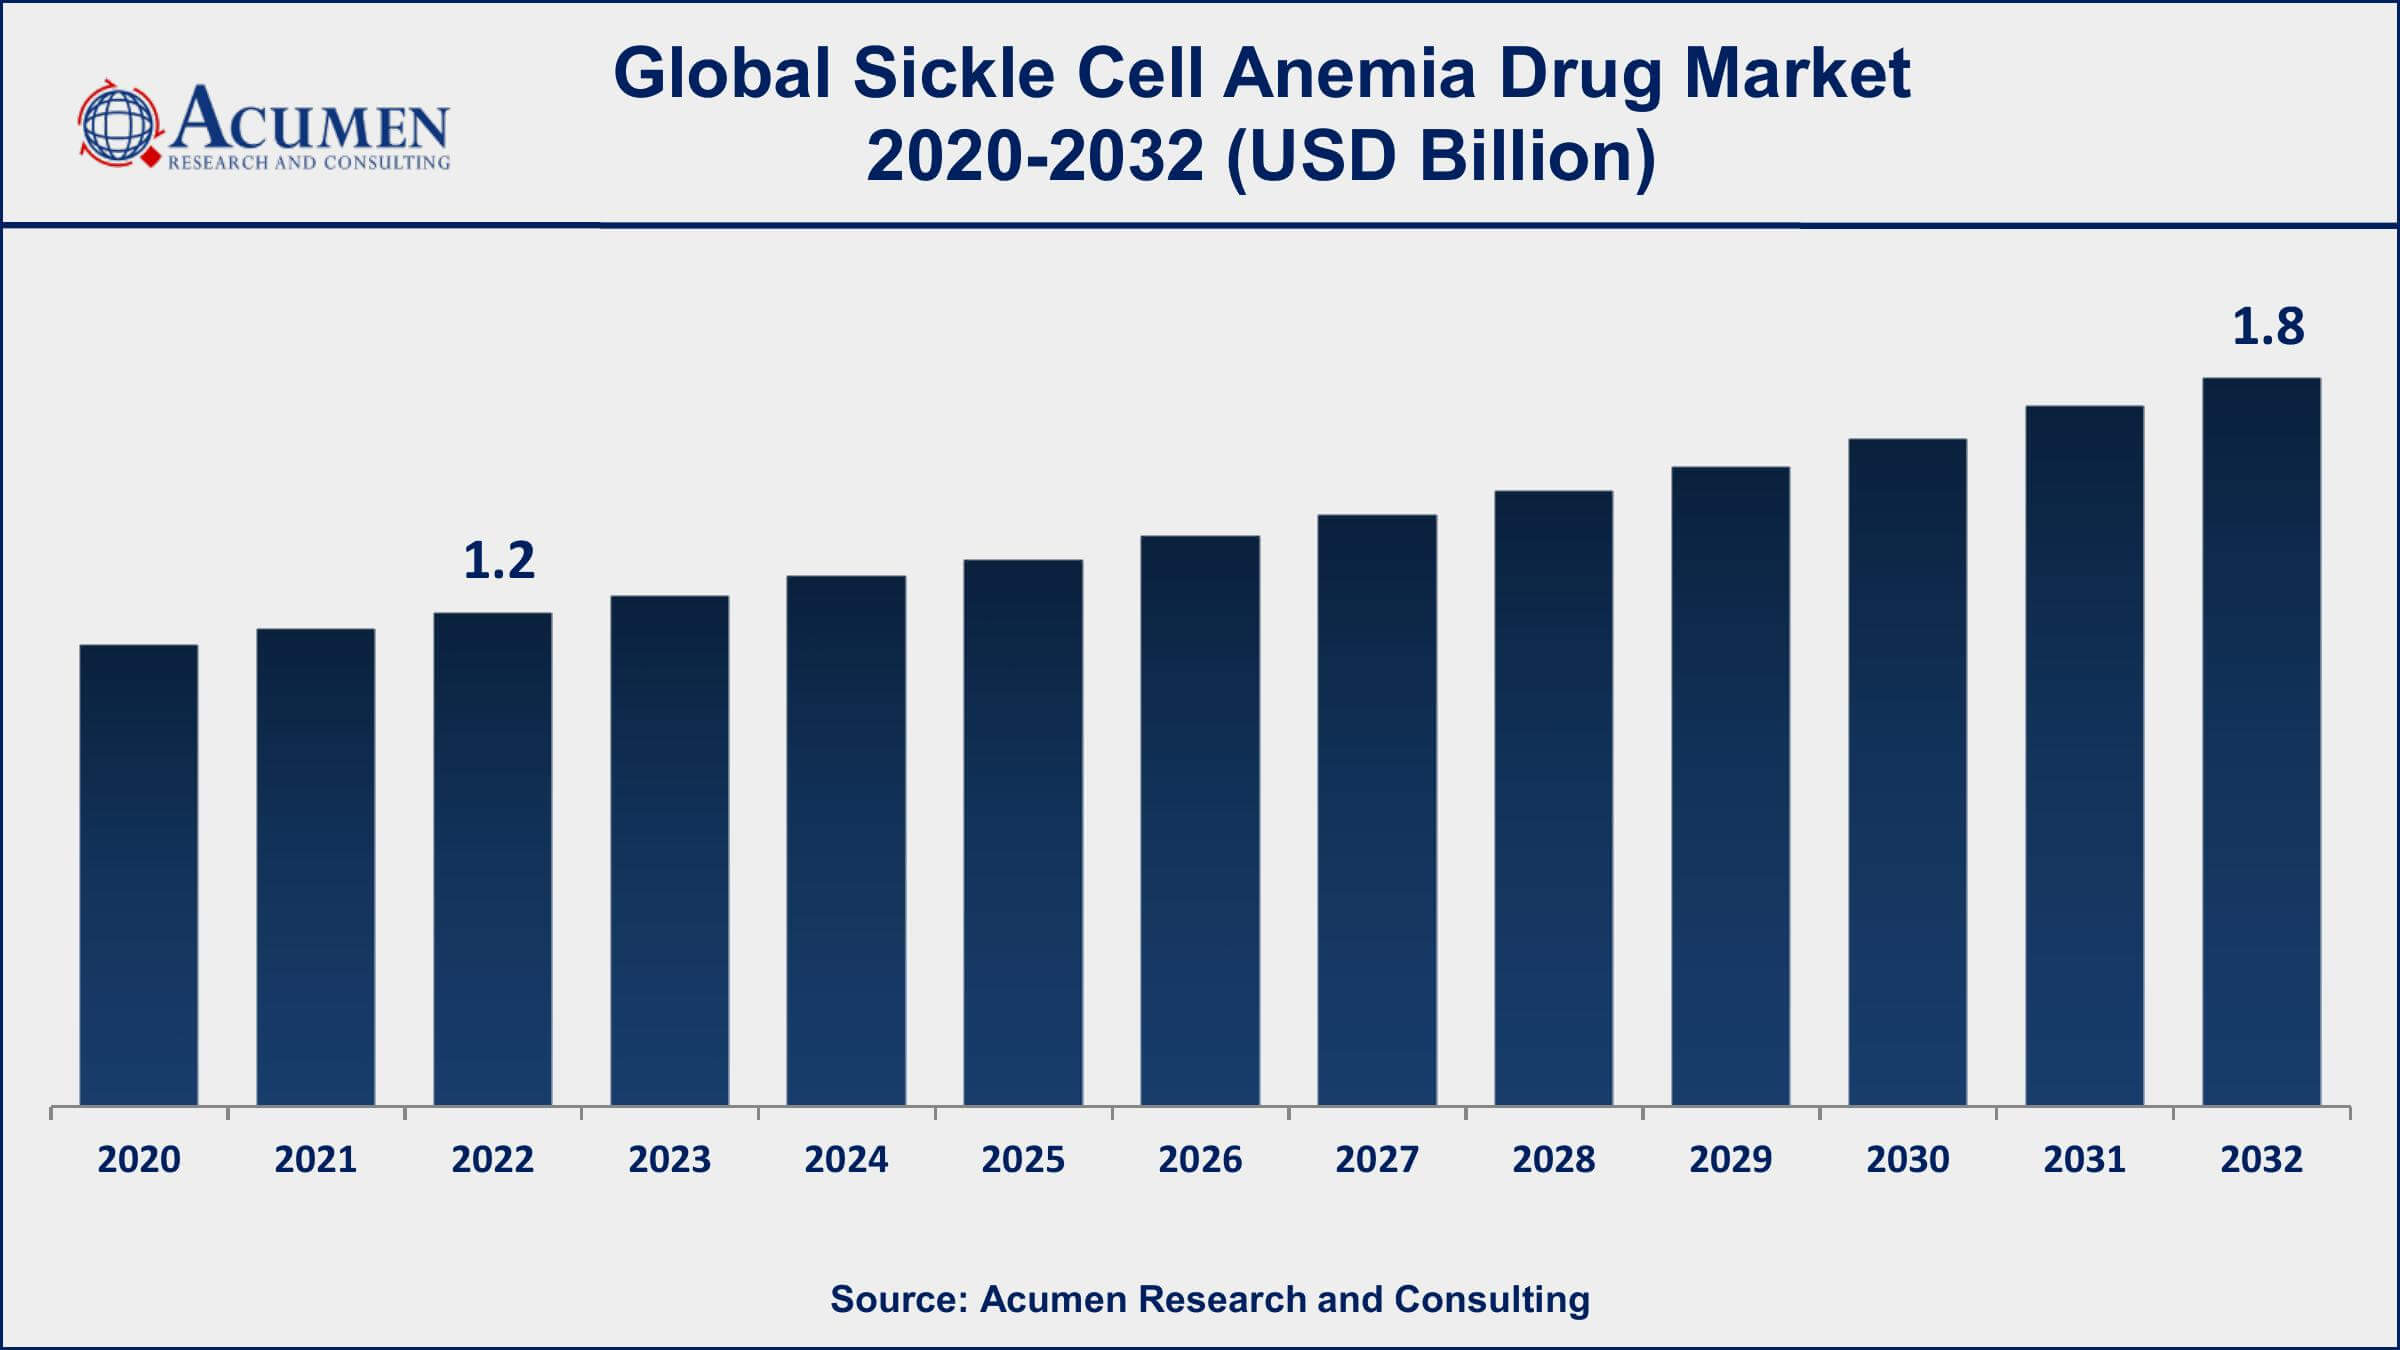 Sickle Cell Anemia Drug Market Dynamics